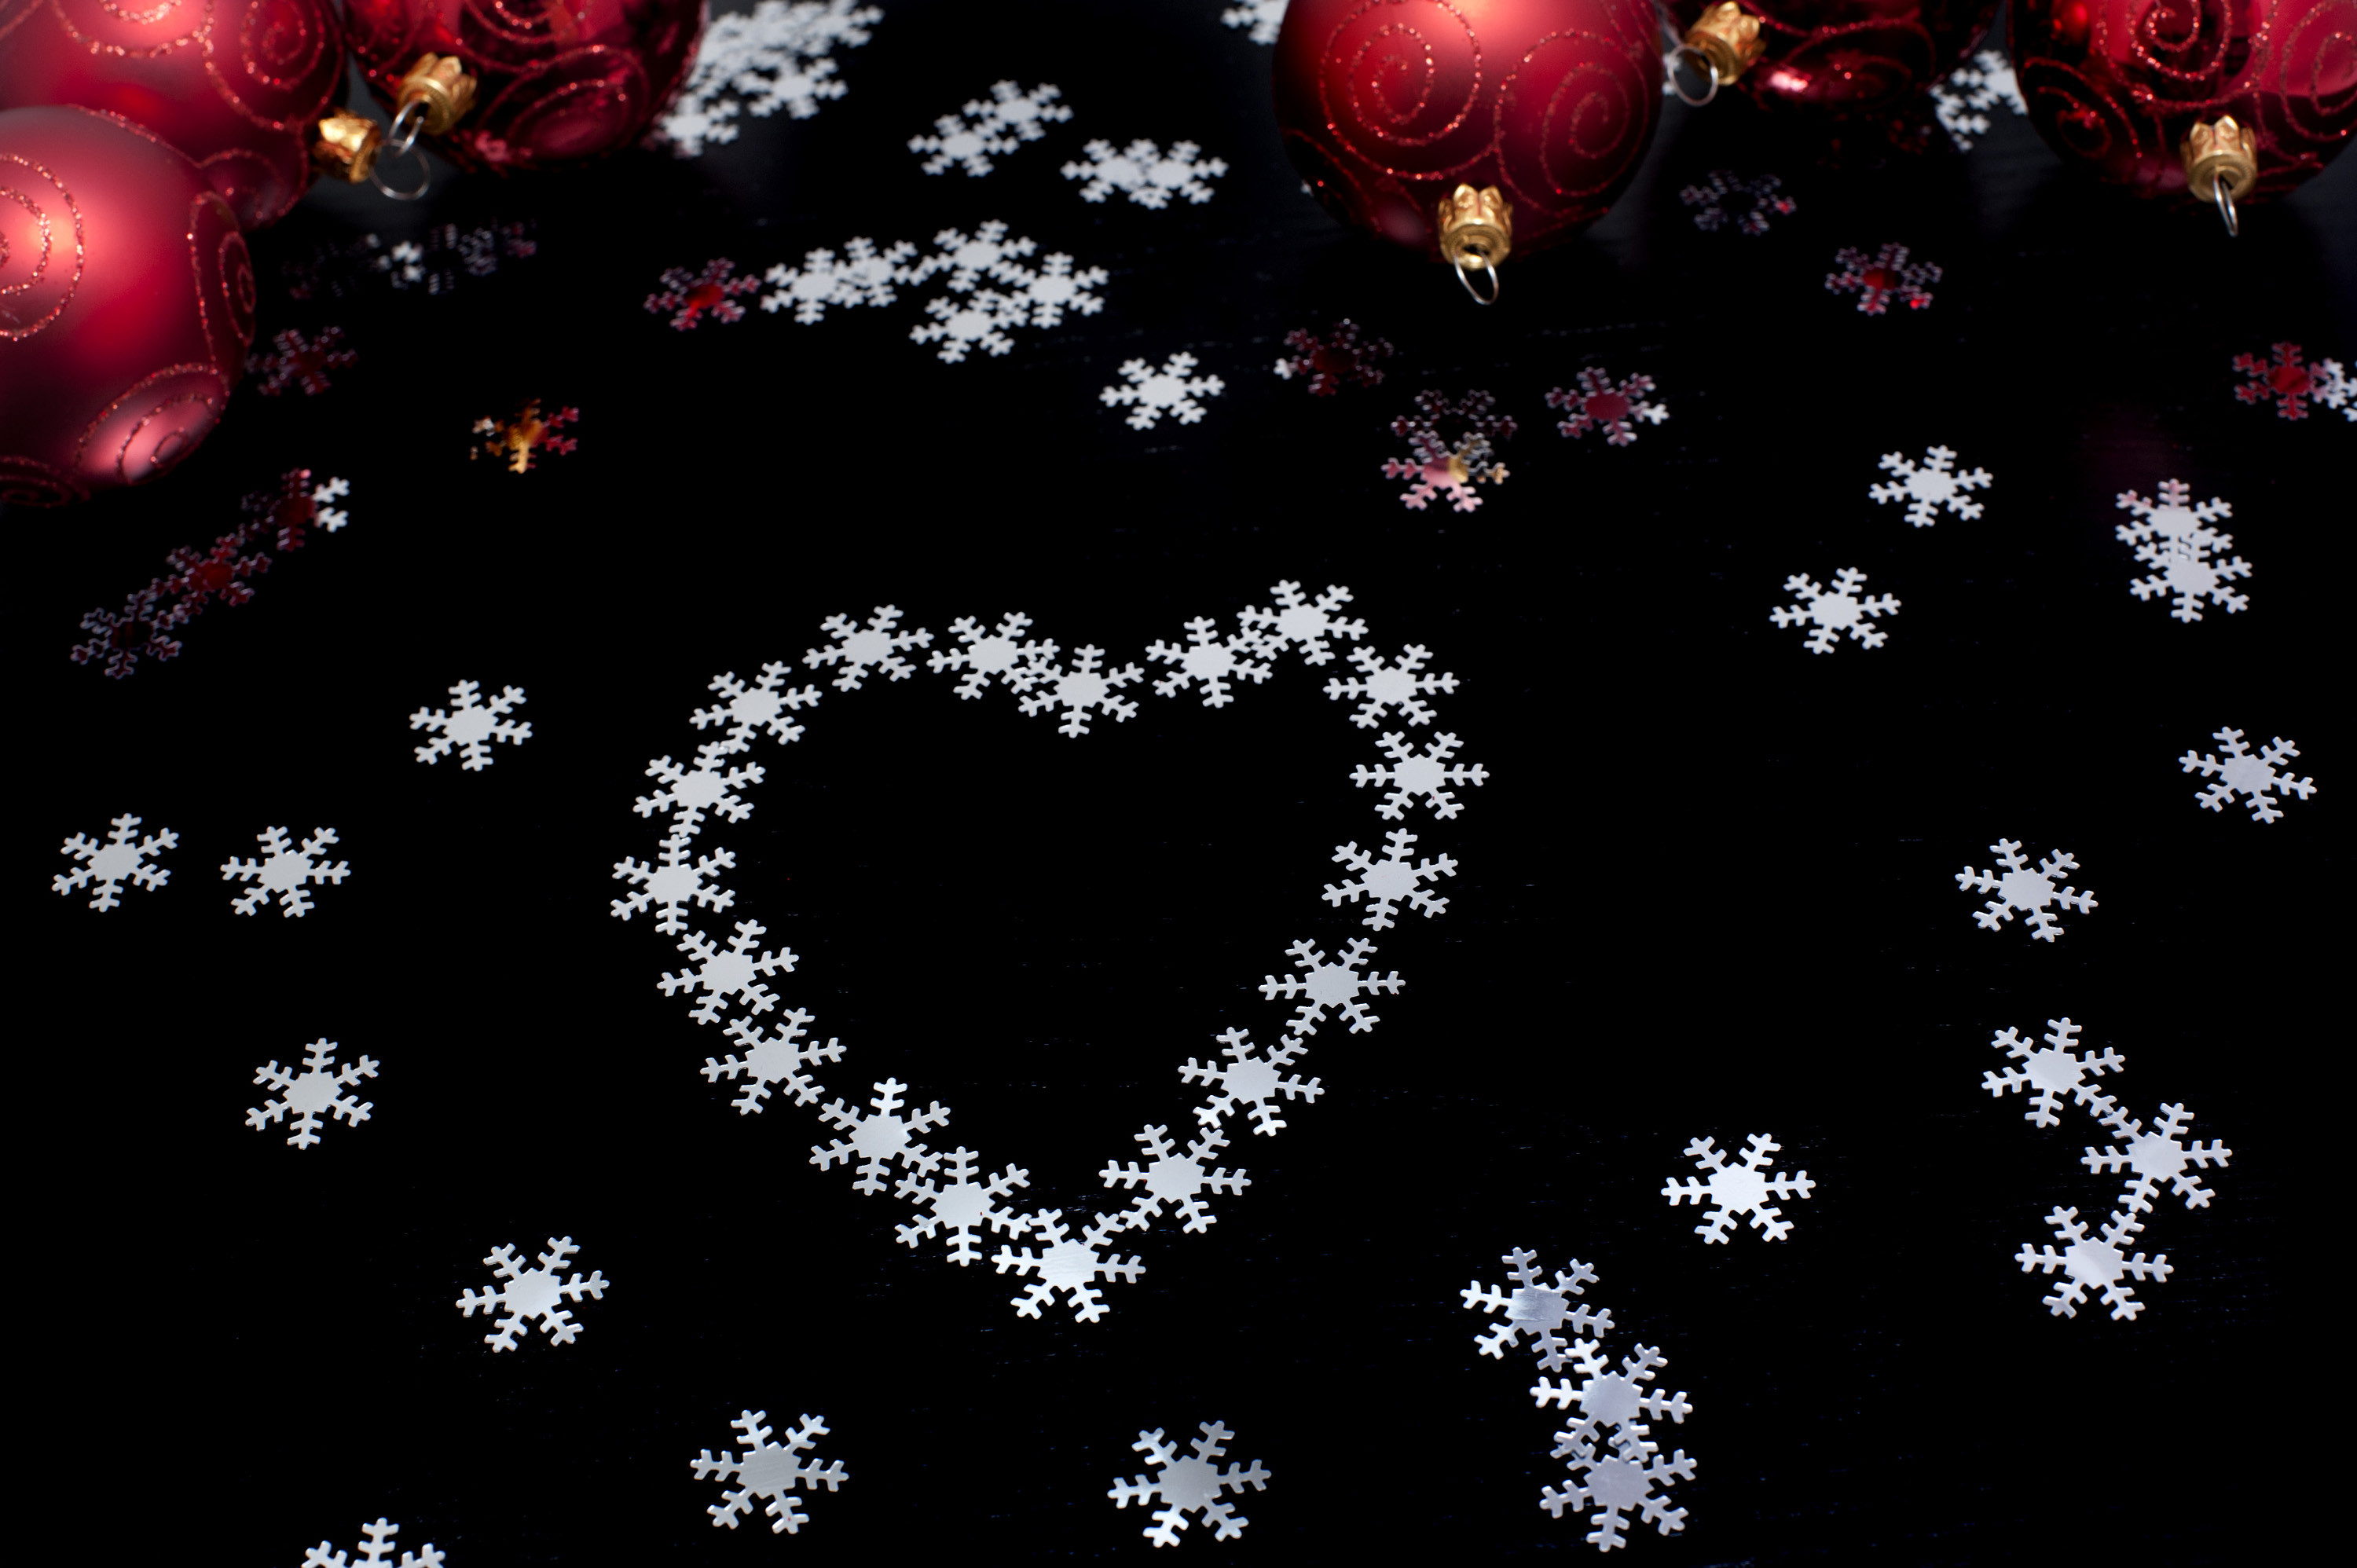 3000x1996 Christmas snowflake heart shape on a black background with scattered  snowflakes and colourful Christmas baubles